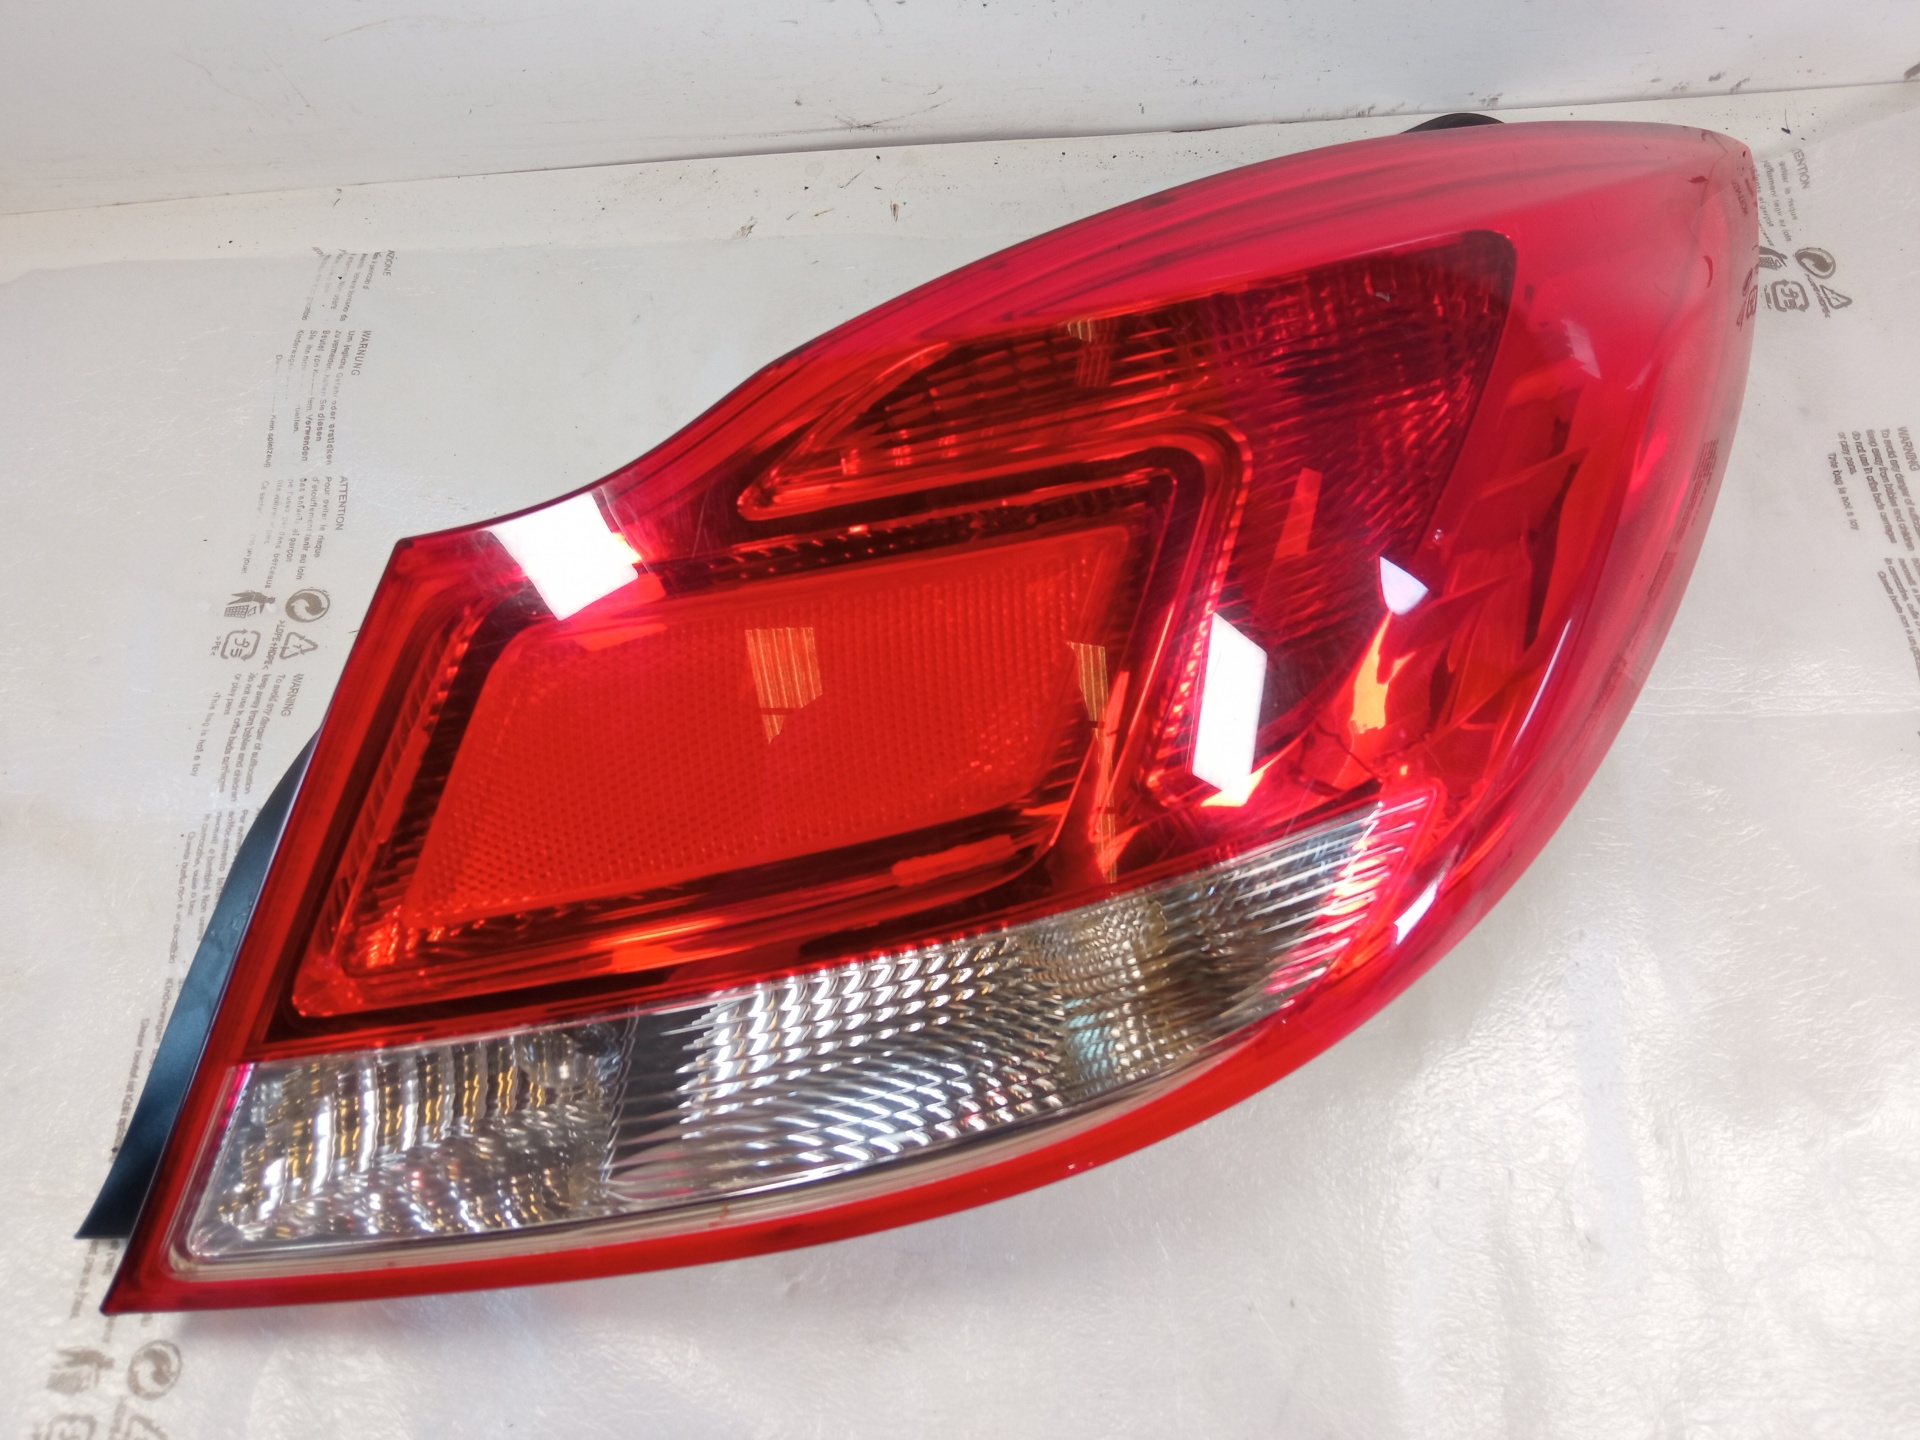 OPEL Insignia A (2008-2016) Rear Right Taillight Lamp 168348, 5PINES 25220318